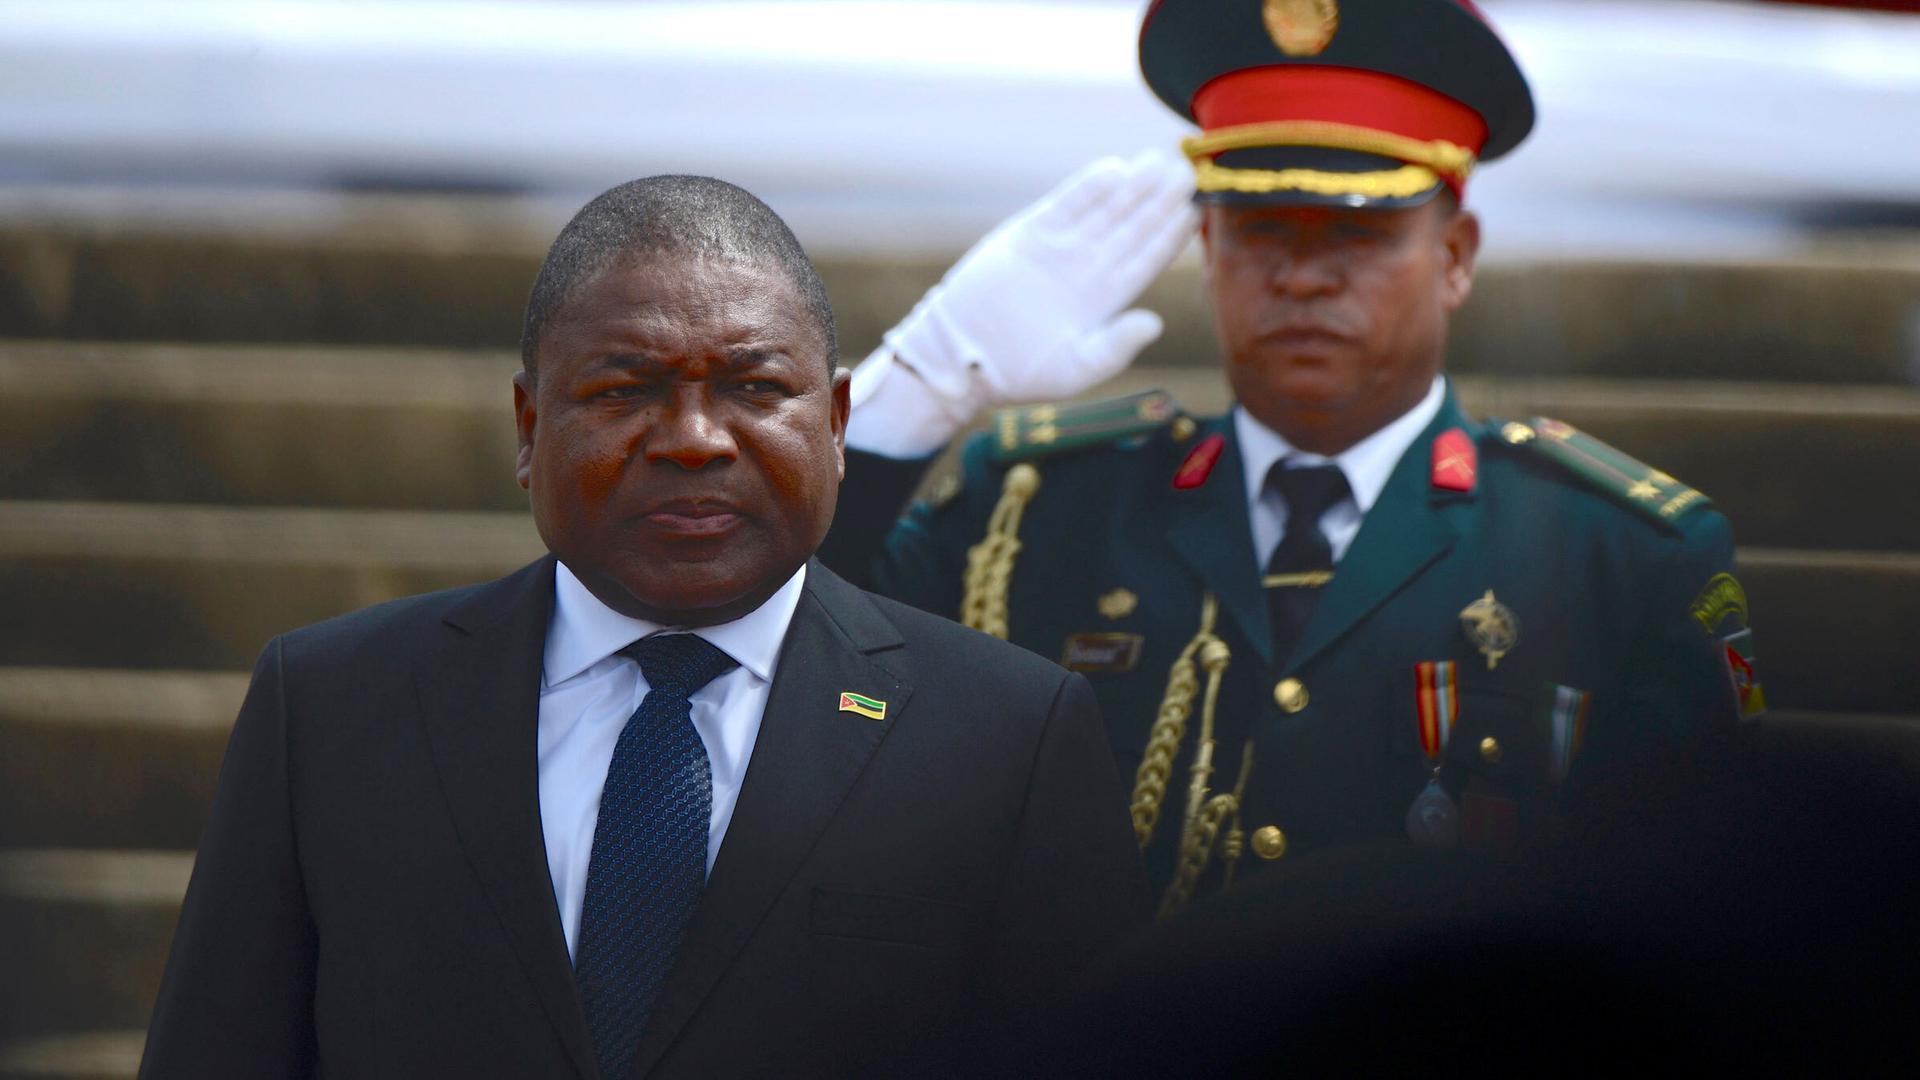 President of Mozambique Filipe Nyusi wears a suit behind a military officer in uniform. 